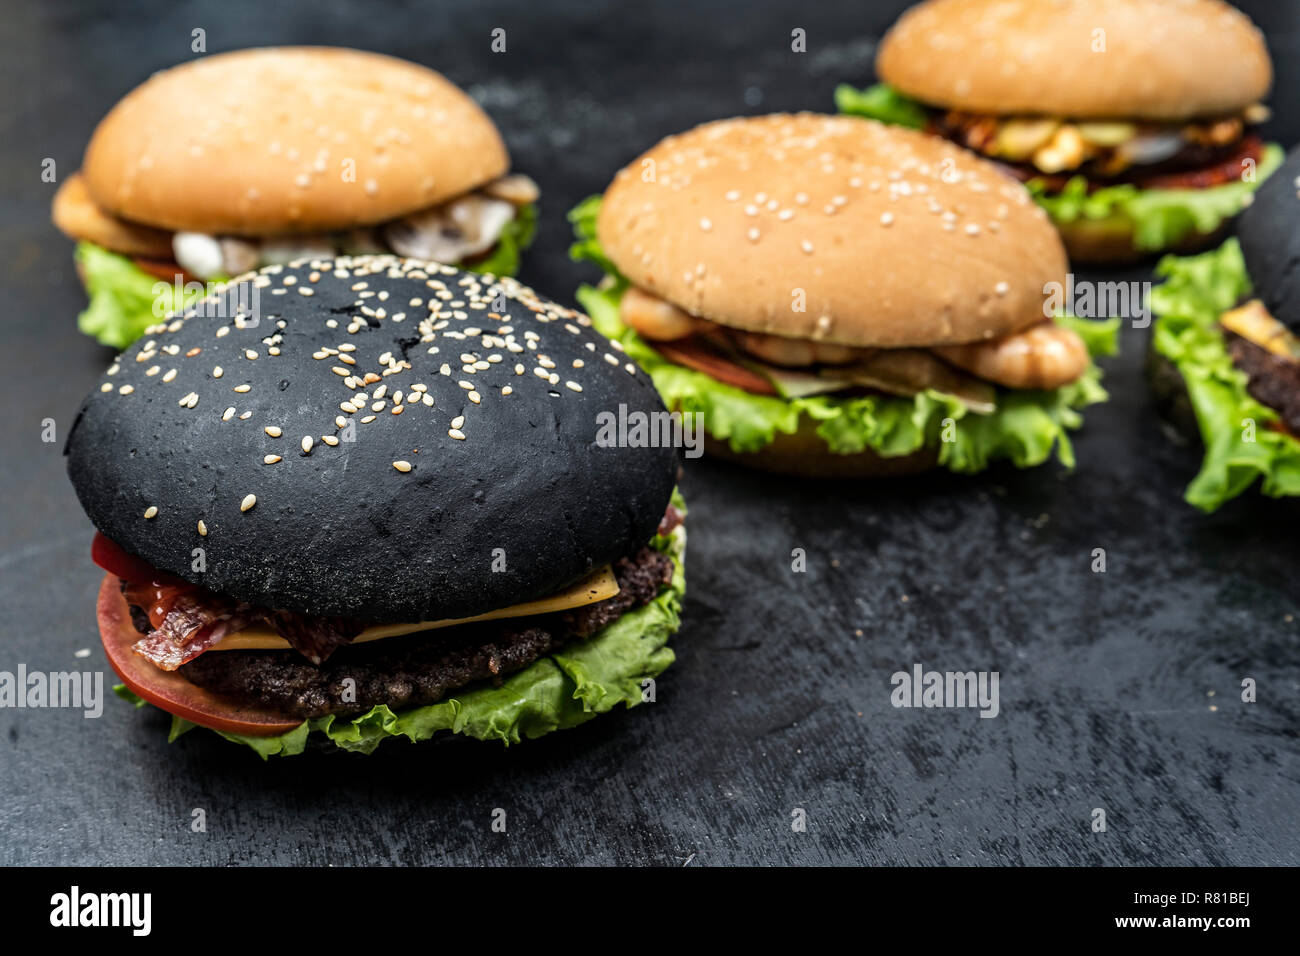 Three hamburger with beef meat burger and fresh vegetables on dark background. Tasty food. Stock Photo